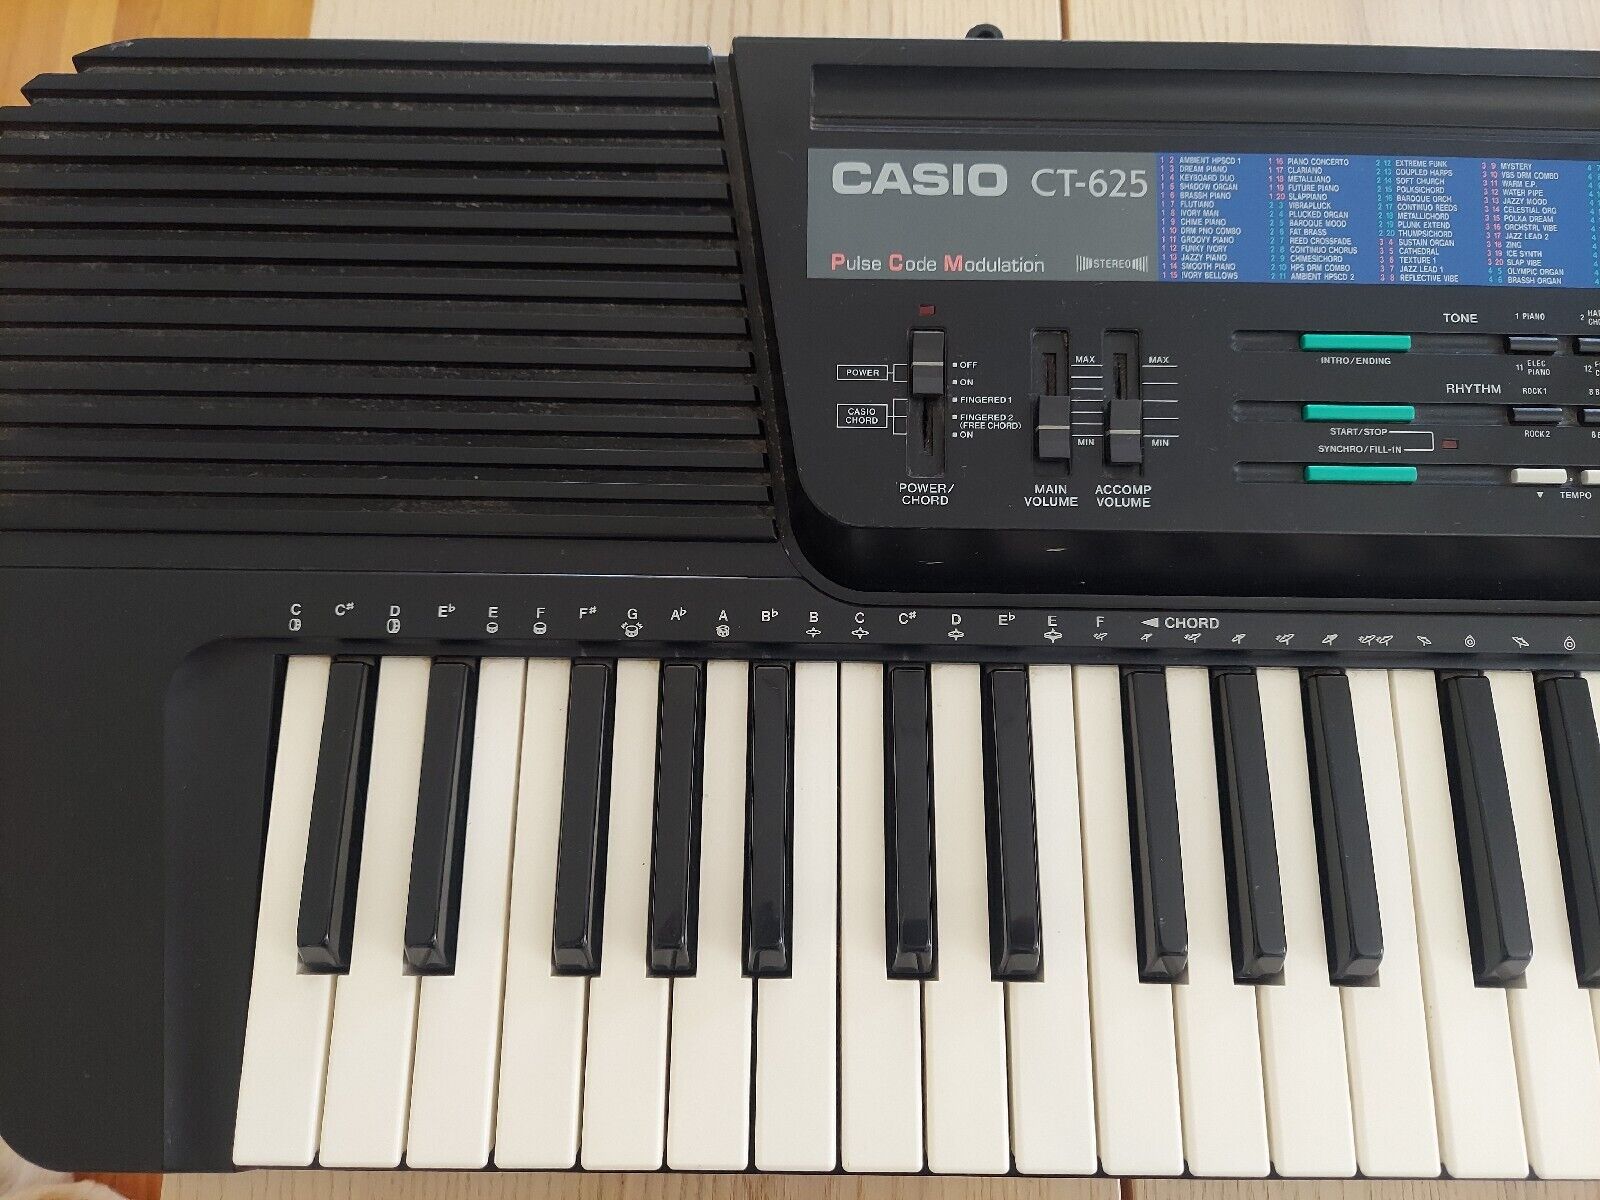 Casio Tone Bank CT-625 Keyboard PIano Vintage Synthesizer